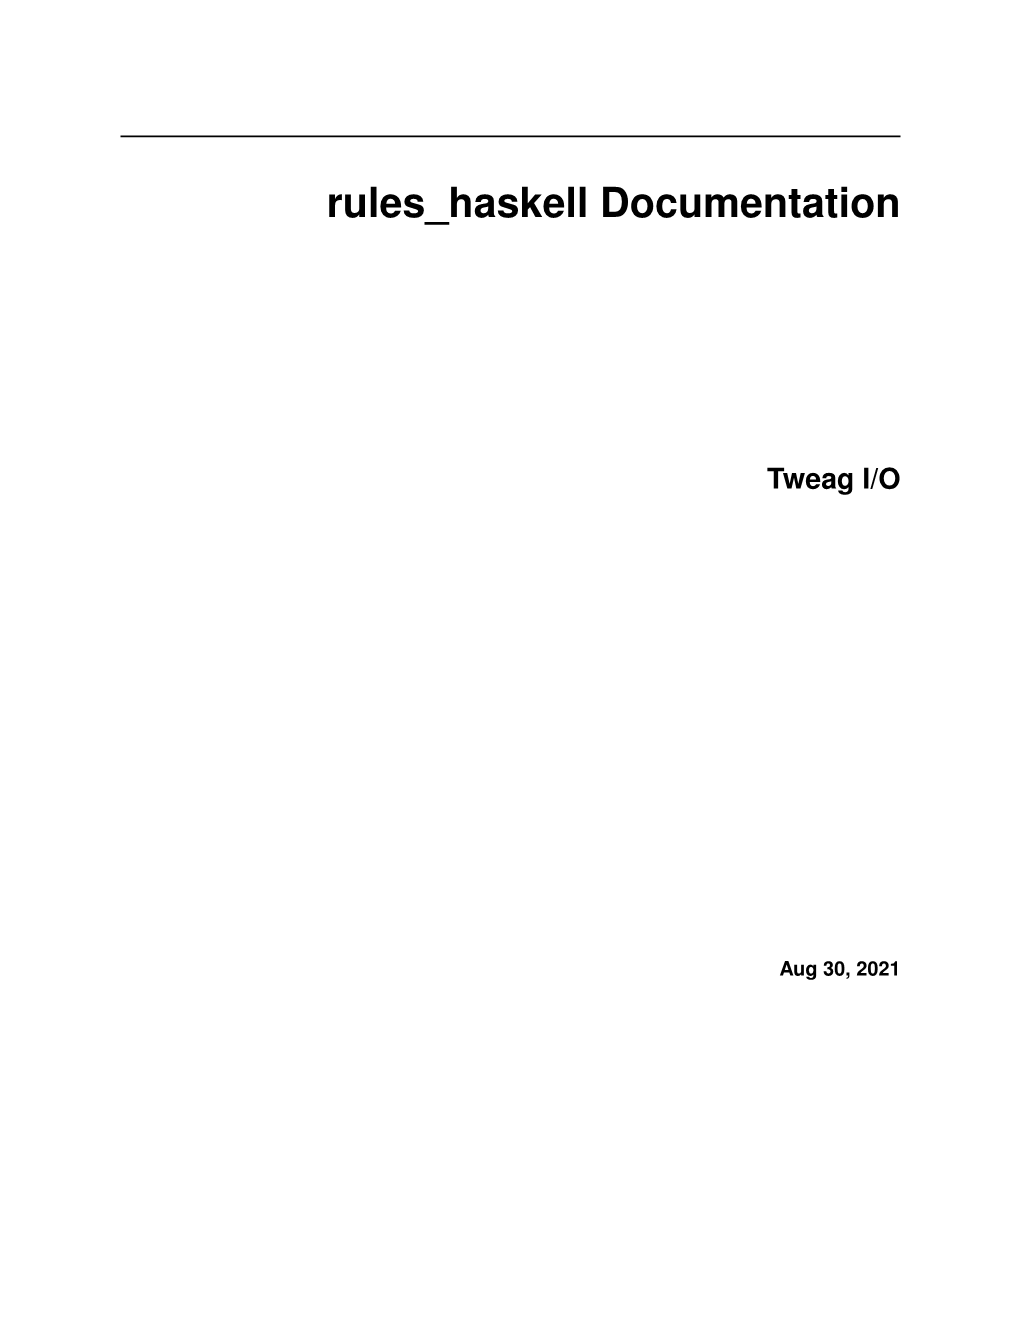 Rules Haskell Documentation